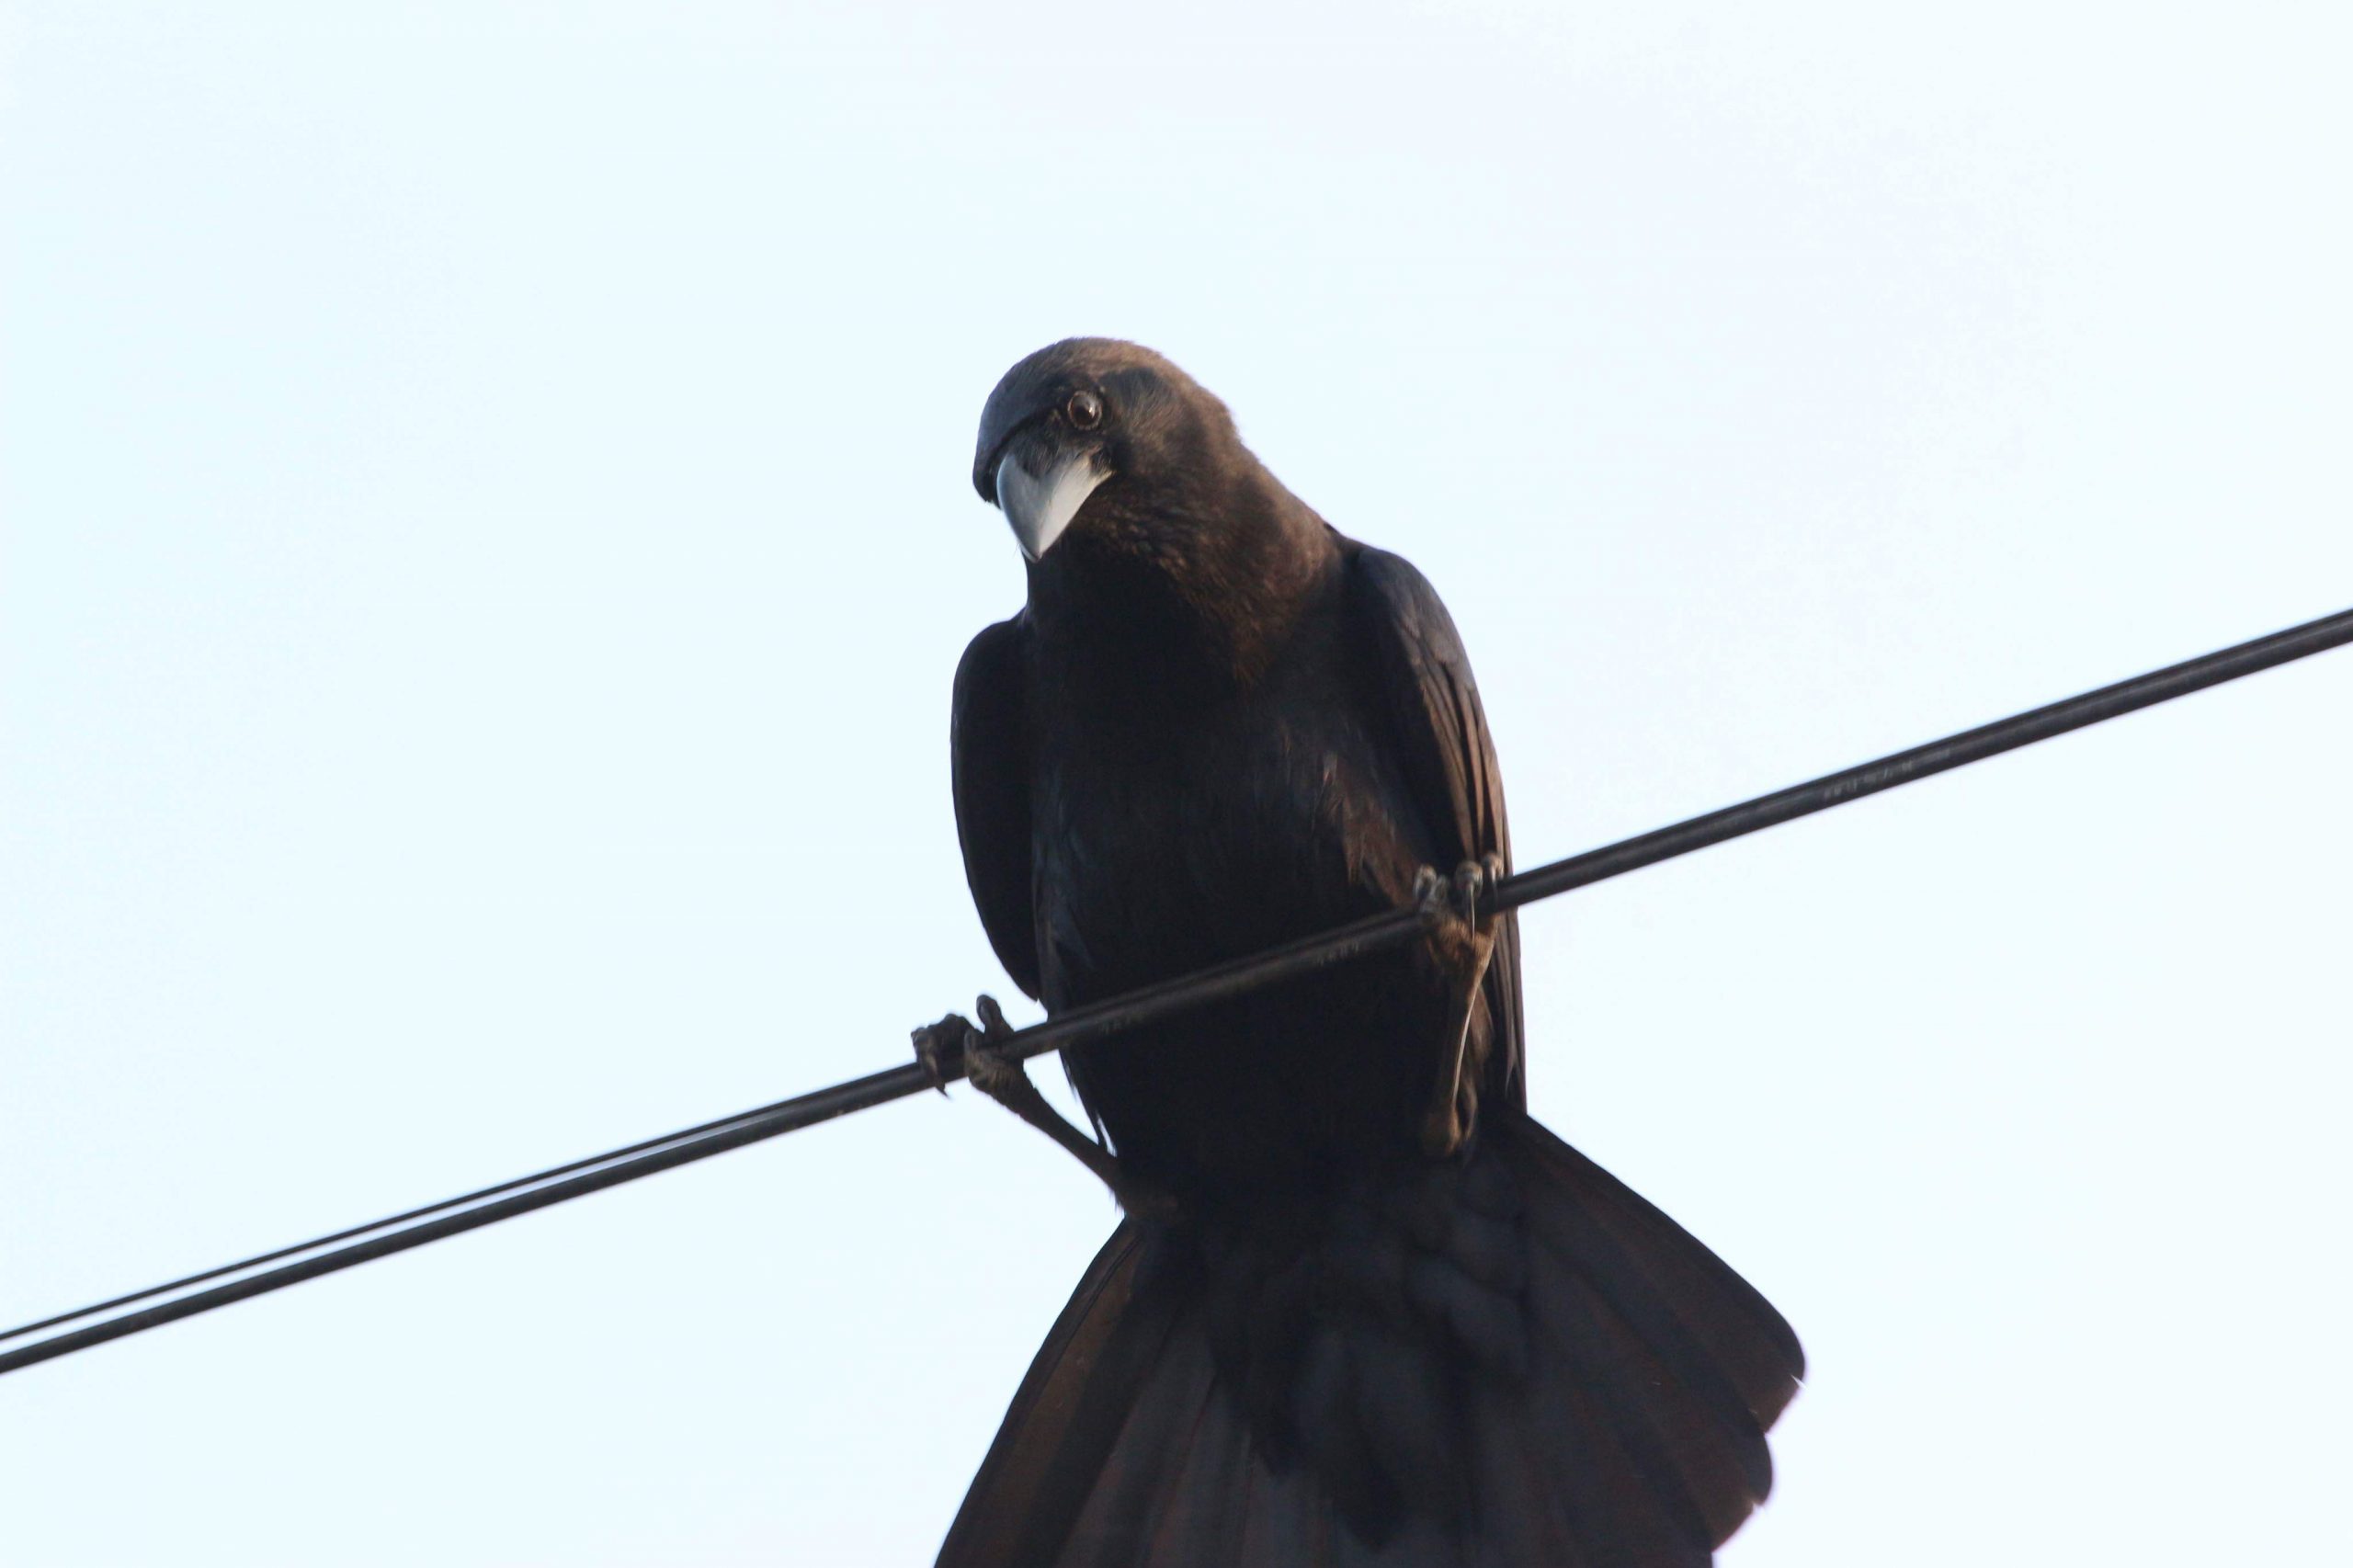 Crow sitting on a wire